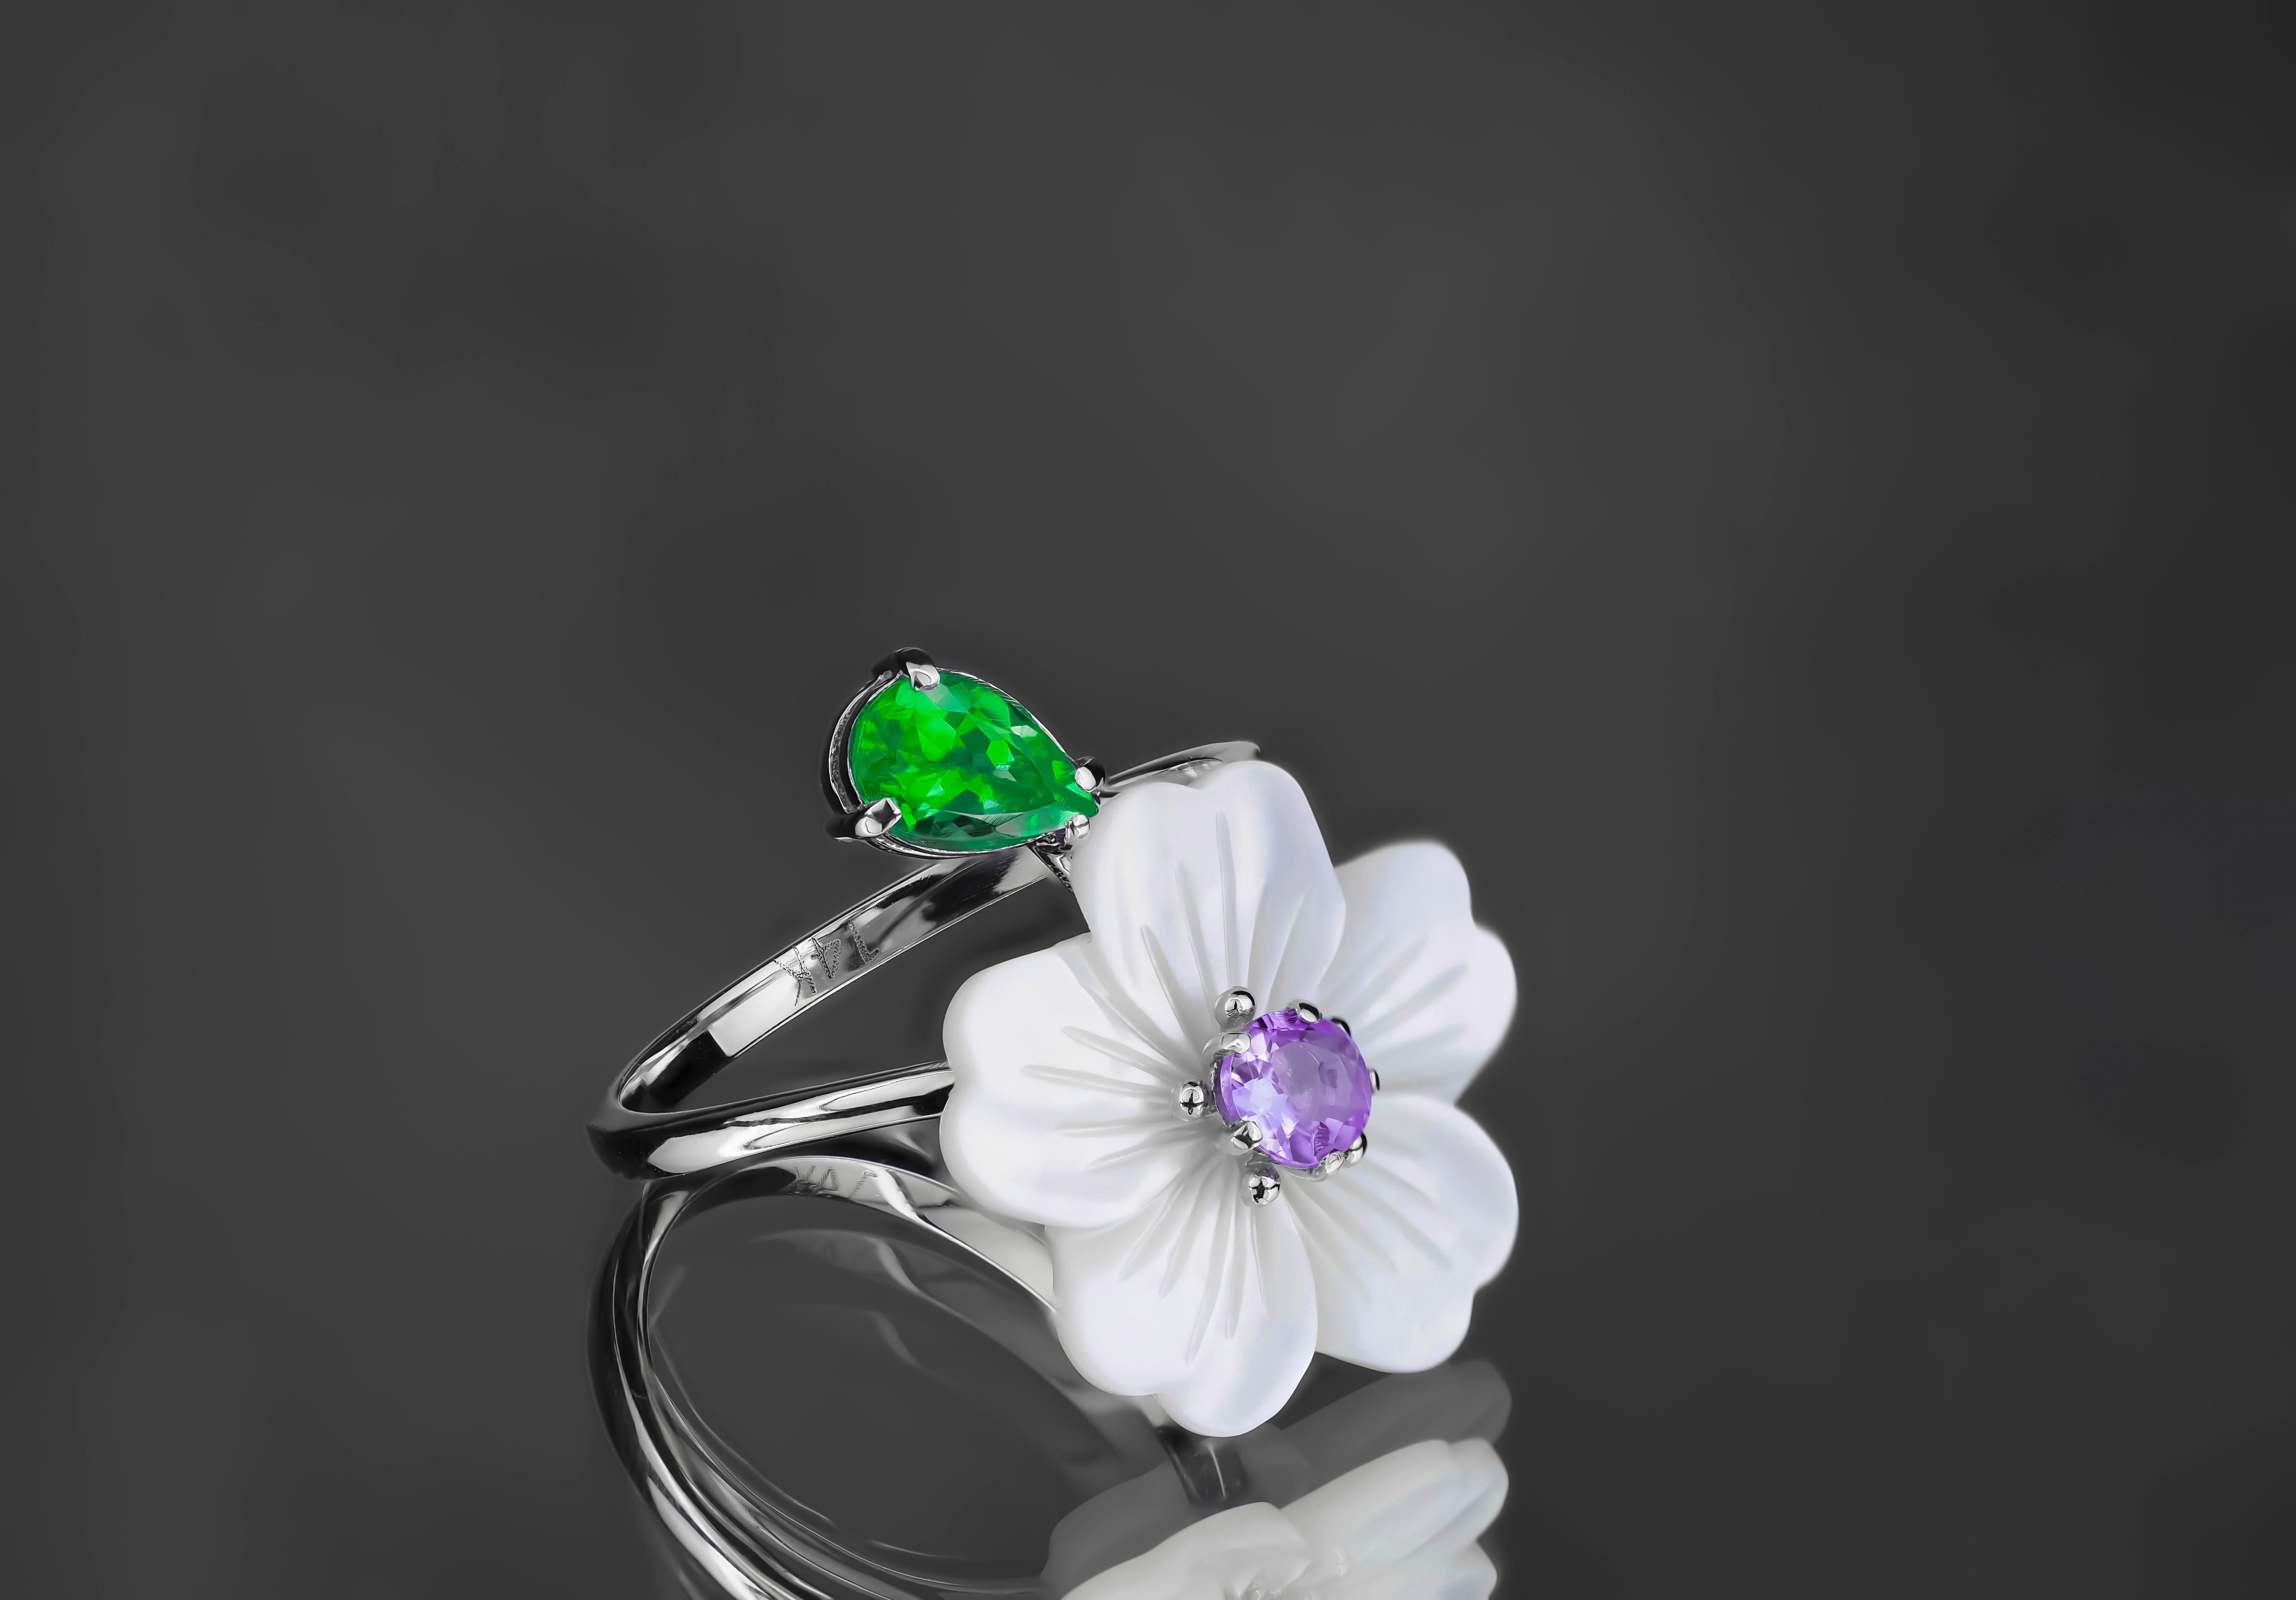 Carved Flower 14k ring with gemstones.
Lab emerald and amethyst ring in 14k gold. Carved mother of pearl flower ring. Flower gold ring. Emerald vintage ring. Nature inspired ring with mother of pearl flower. Shell flower ring.

Metal: 14k solid